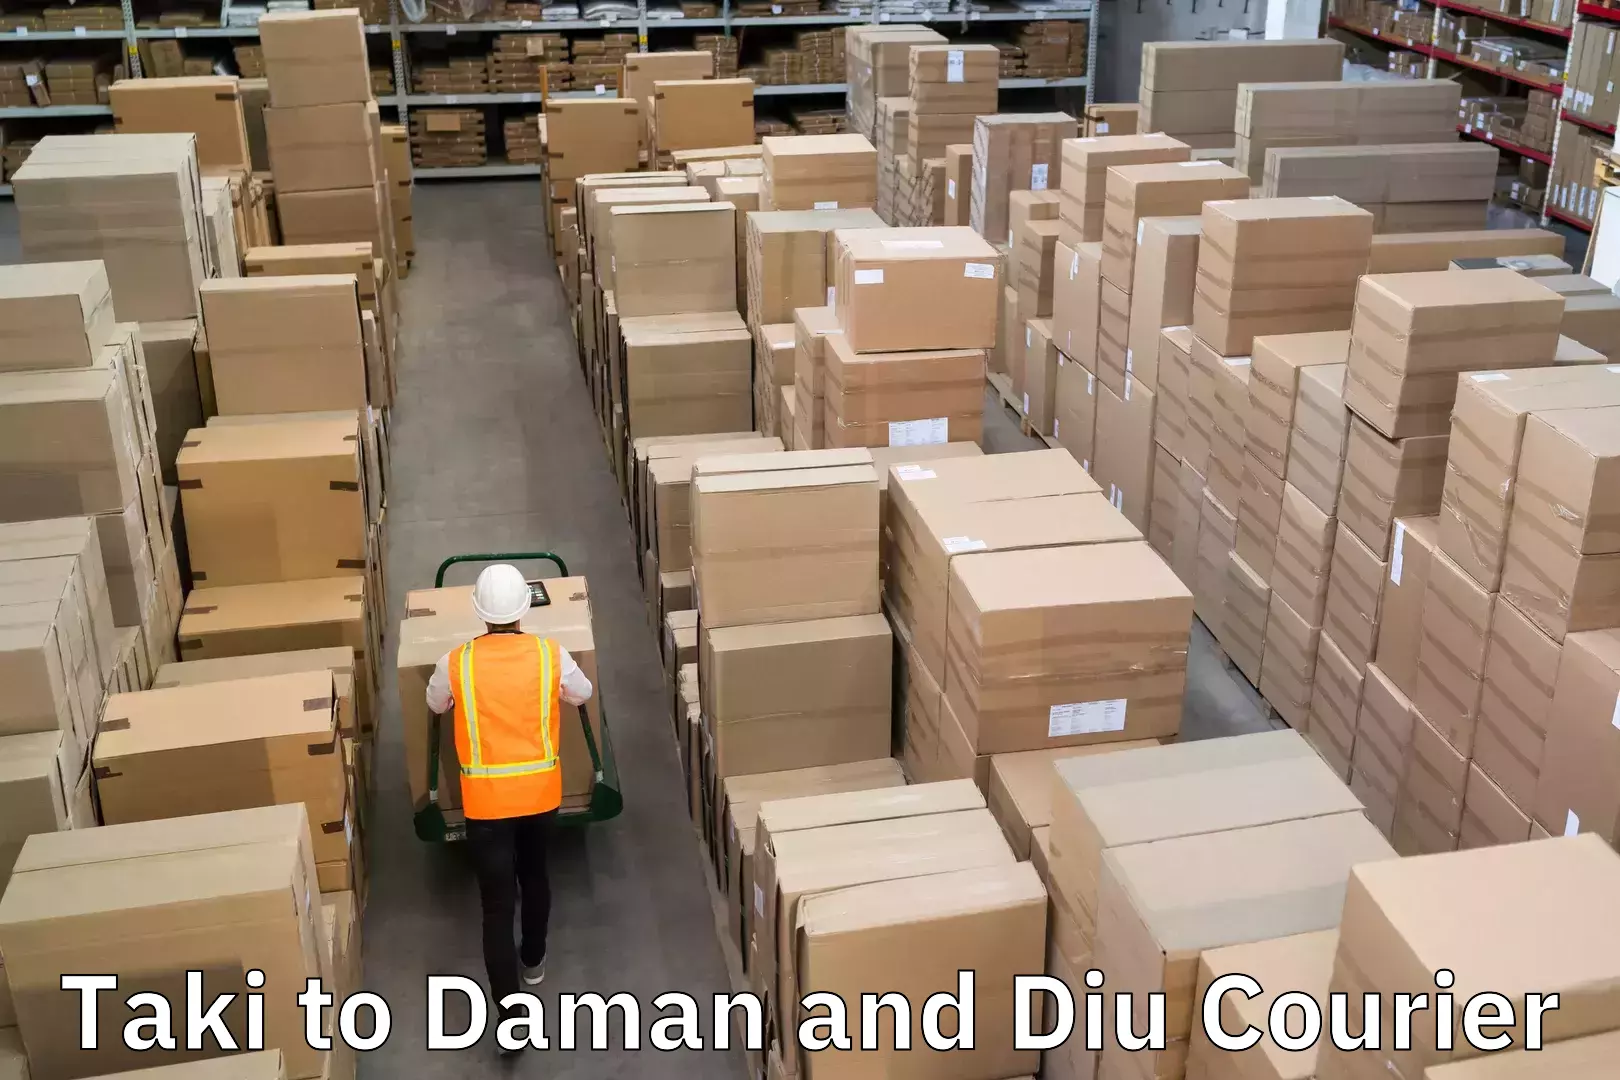 Courier rate comparison Taki to Daman and Diu